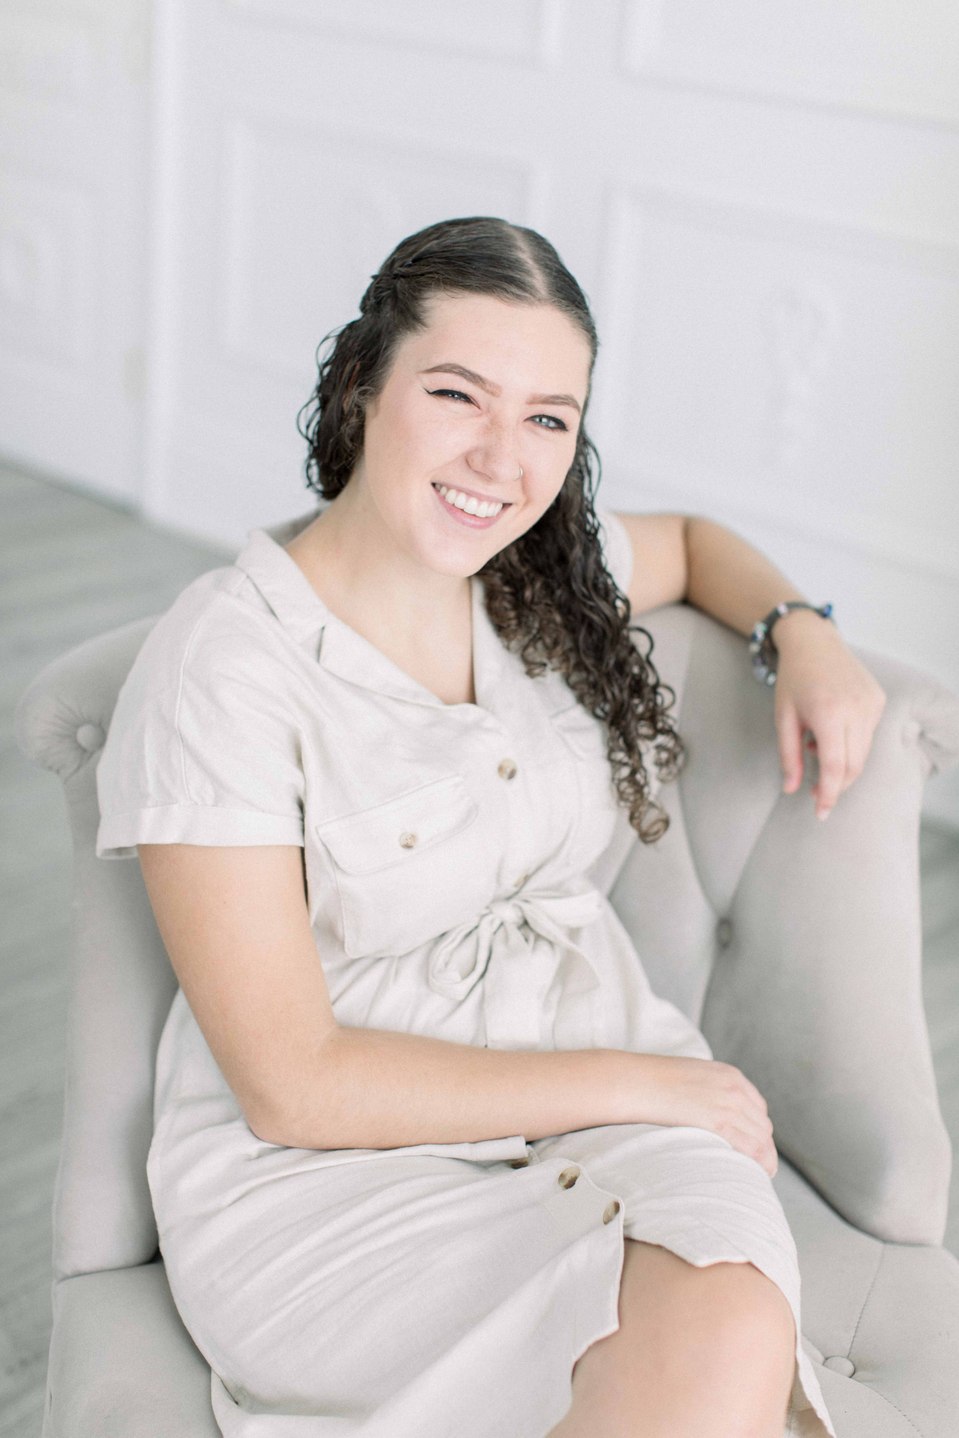 Portrait of woman sitting on chair looking into the camera, smiling. Niagara portrait photography, Niagara portrait photographer, Niagara branding photography, Niagara branding photographer, Niagara family photography, Niagara family photographer.